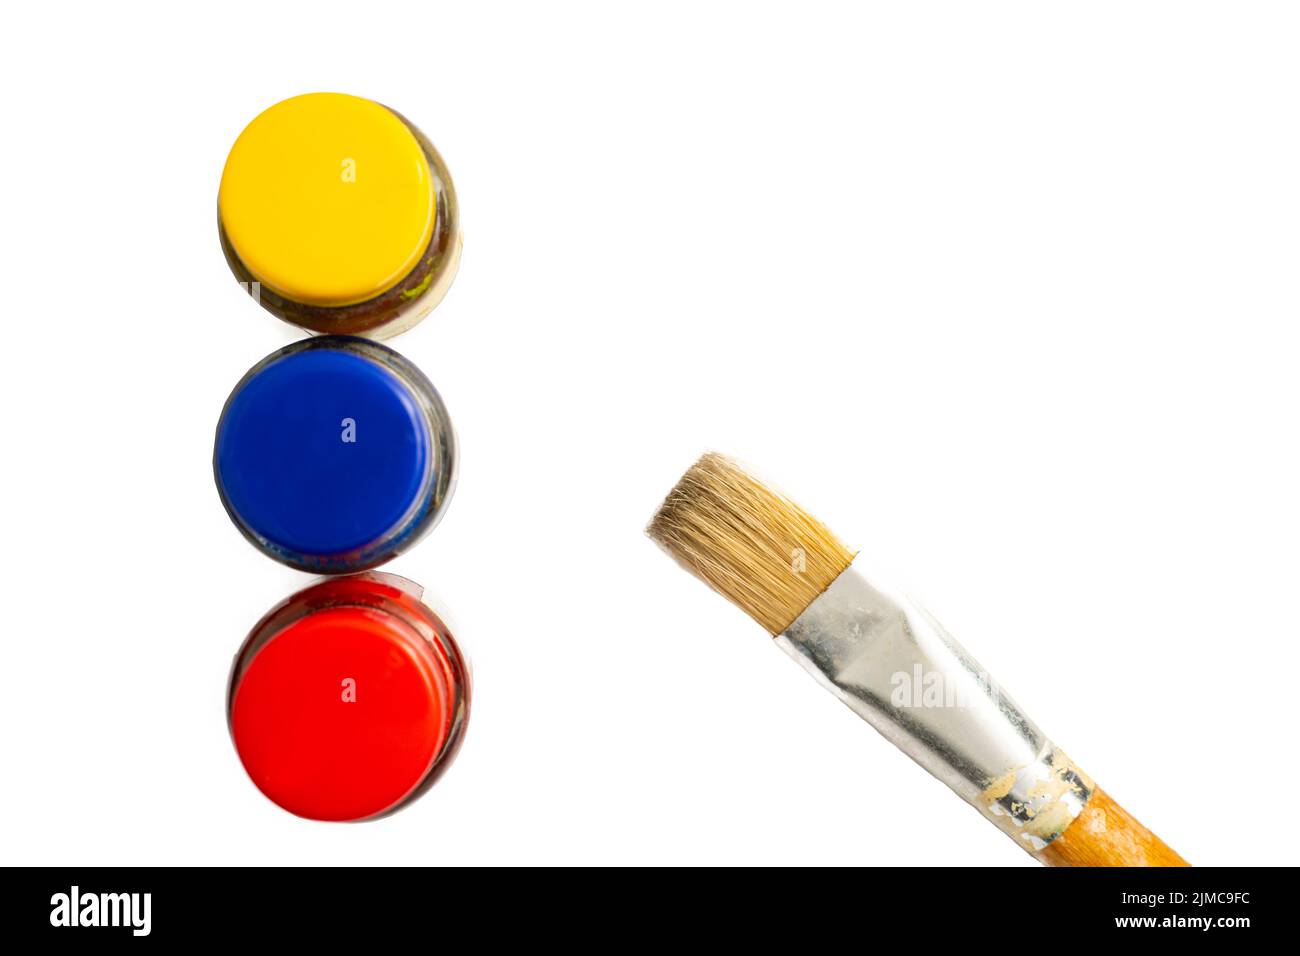 Top view of opened bottles of primary color on white background. Stock Photo